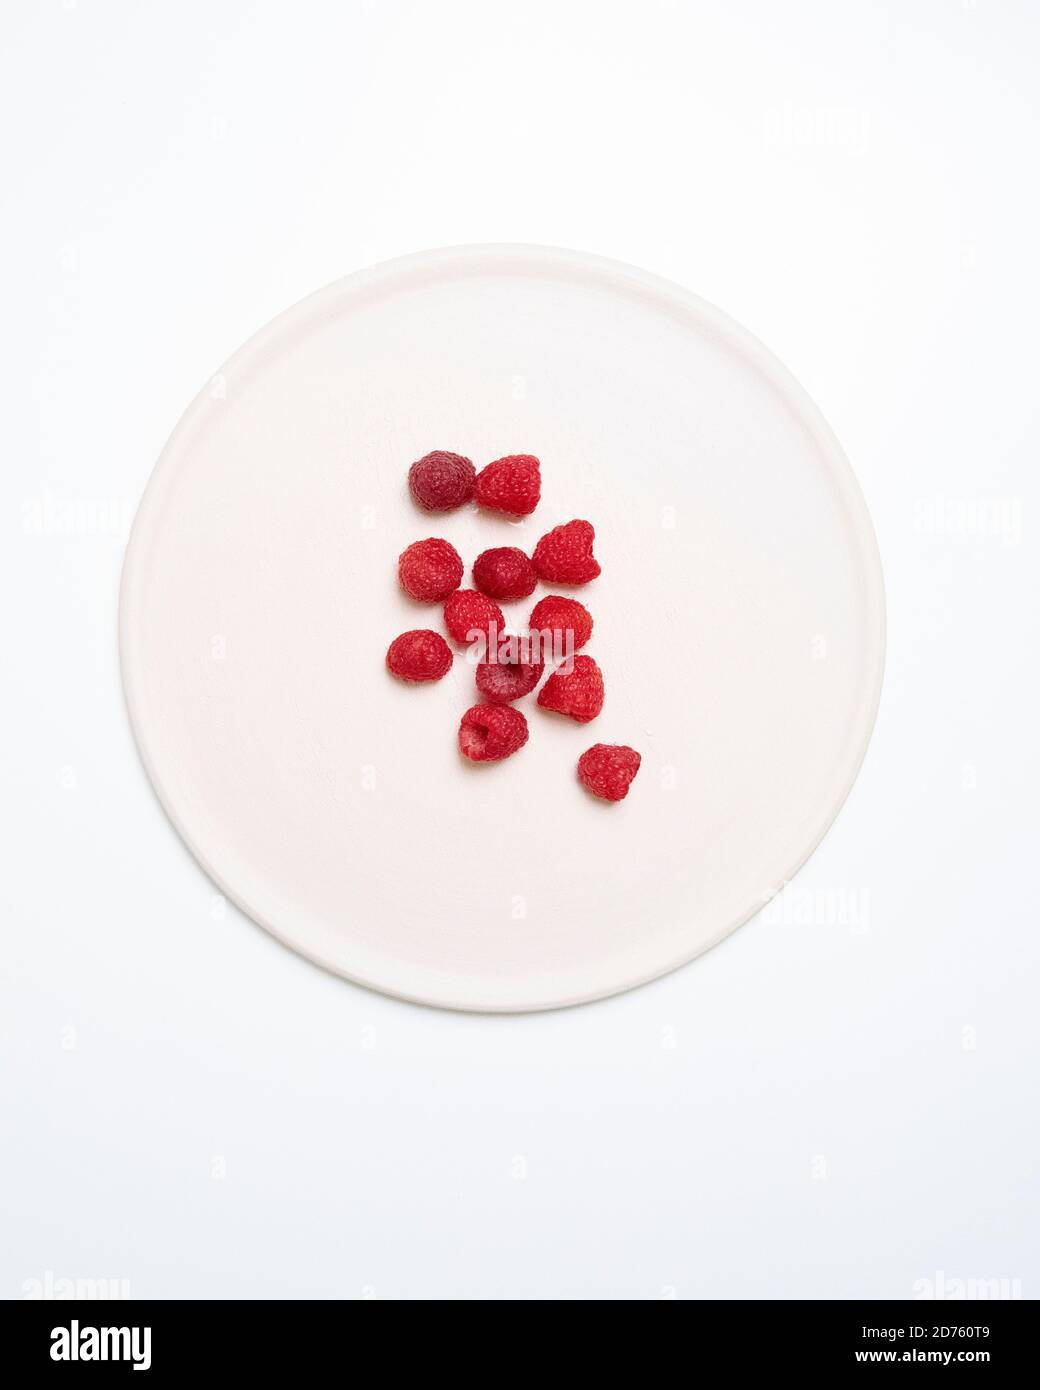 High Angle View of Raspberries on Round White Plate Stock Photo